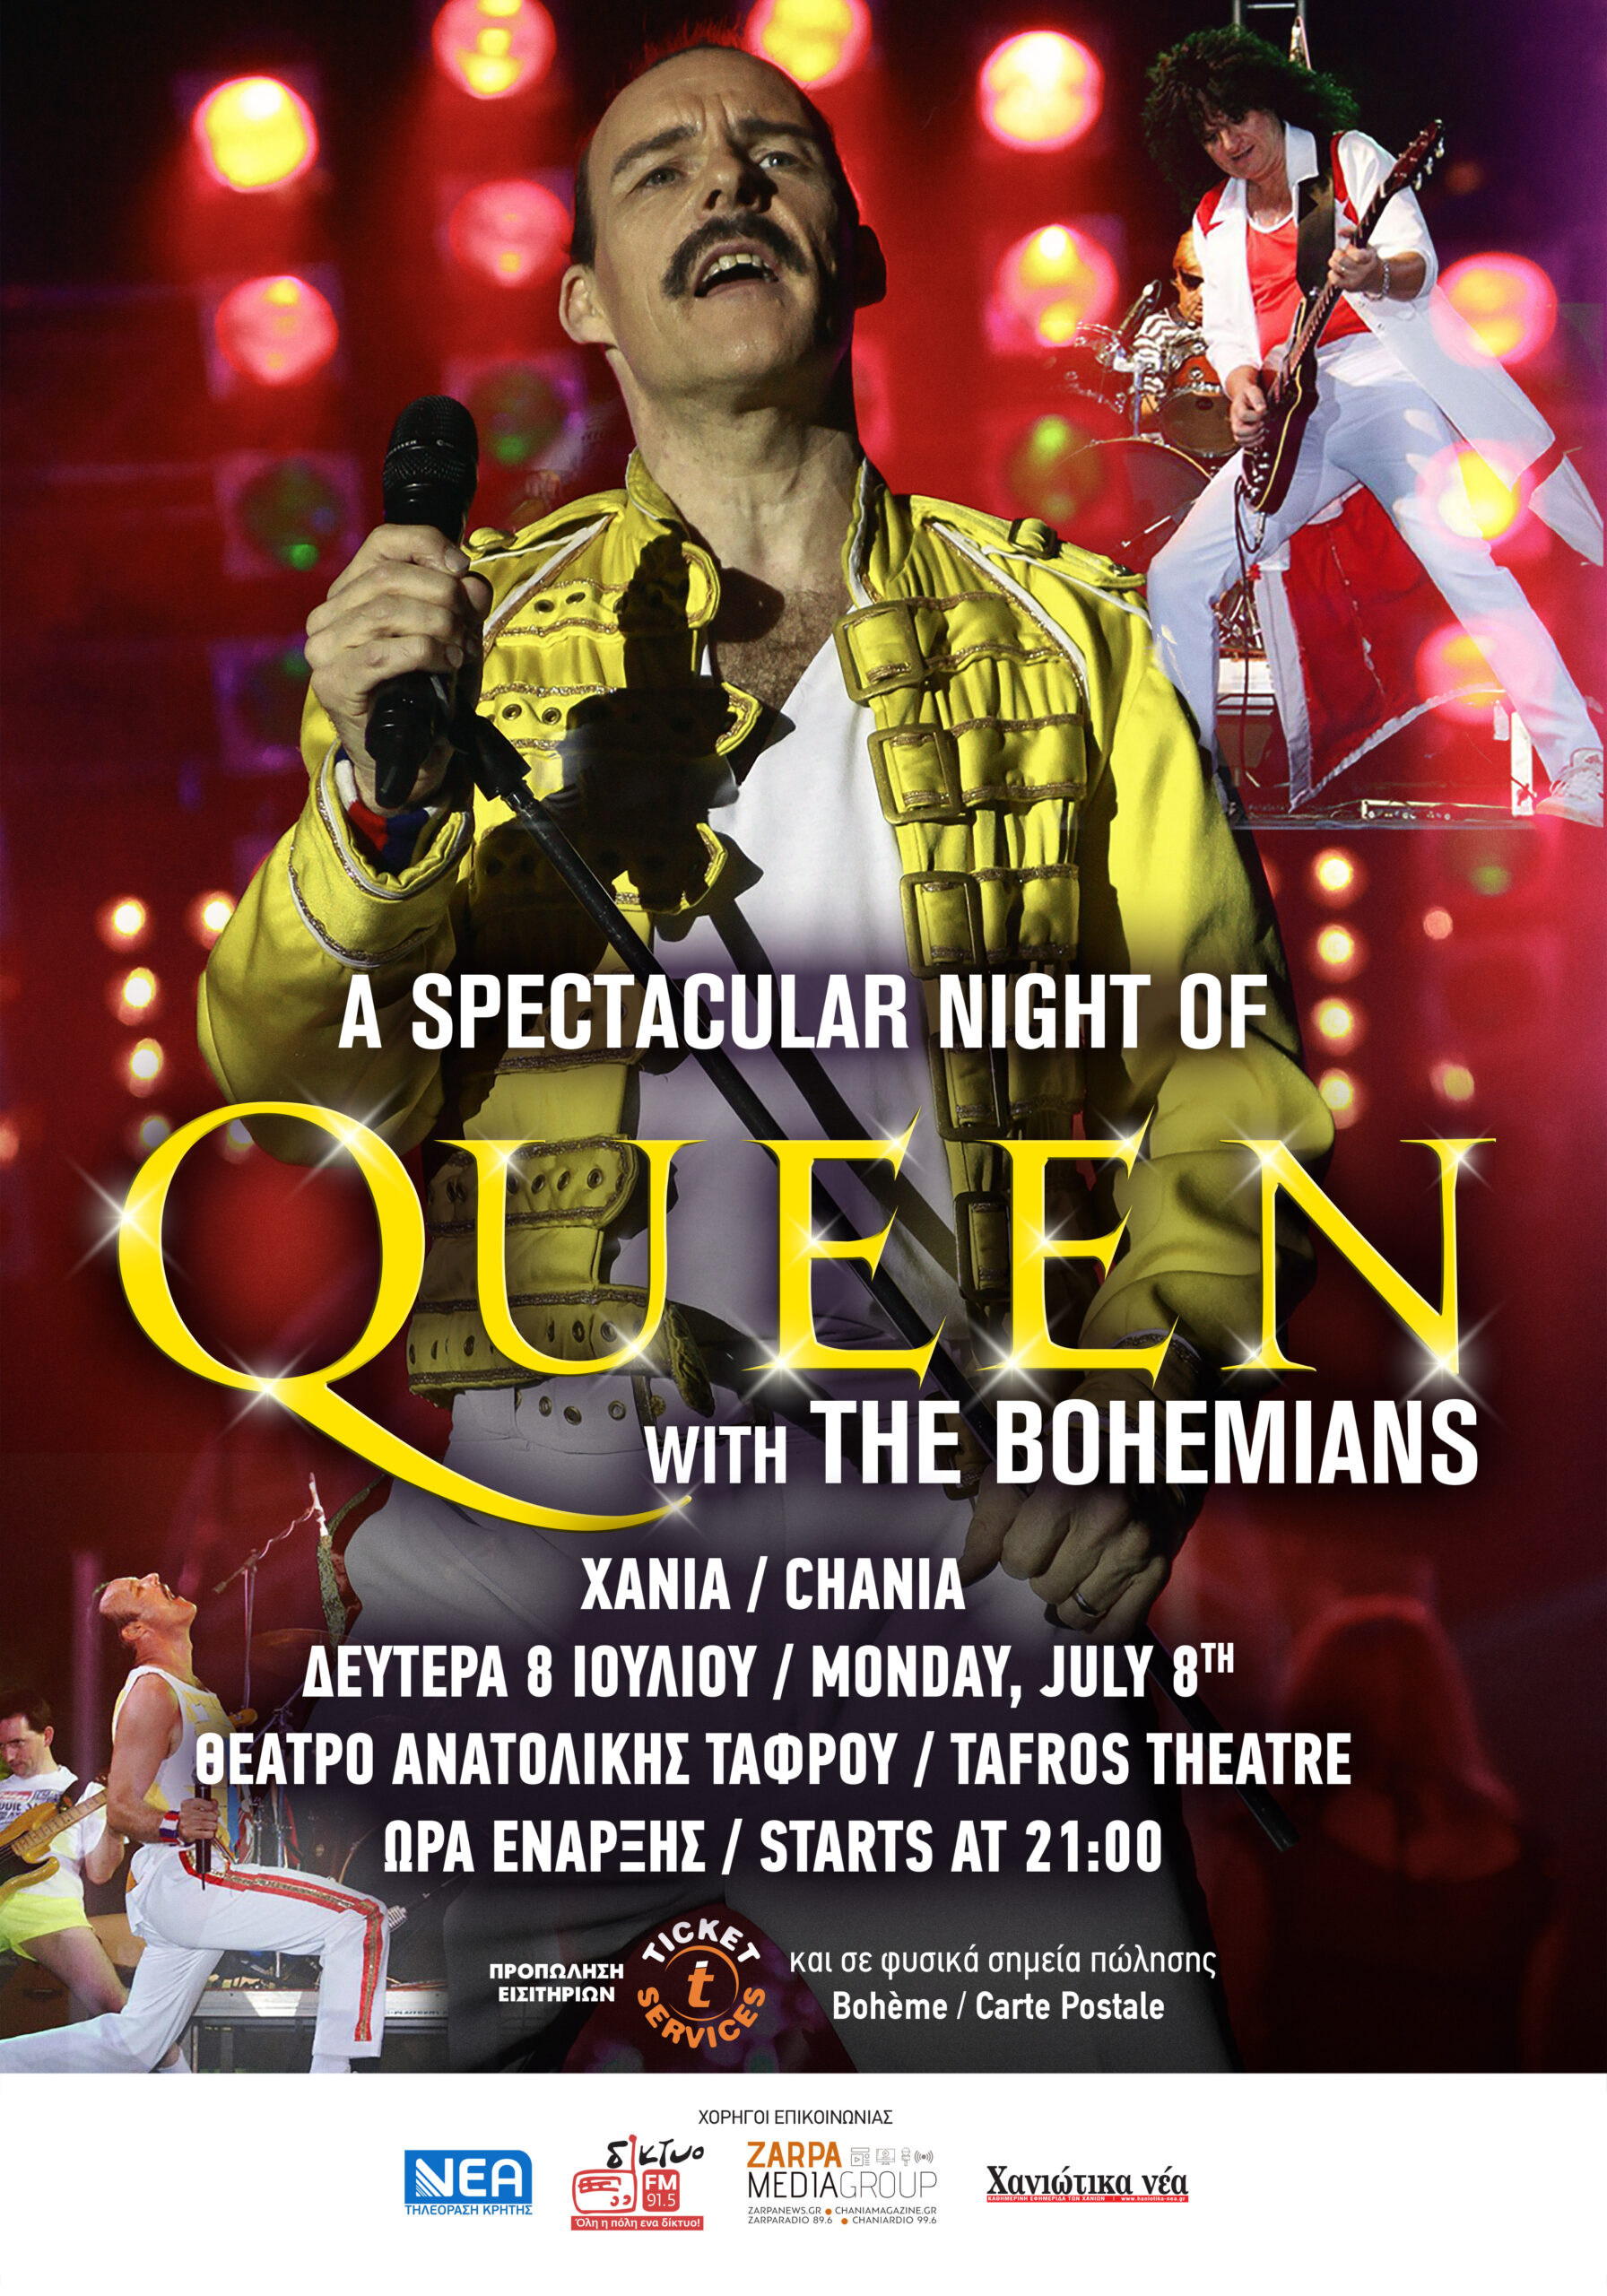  “A Night of Queen”